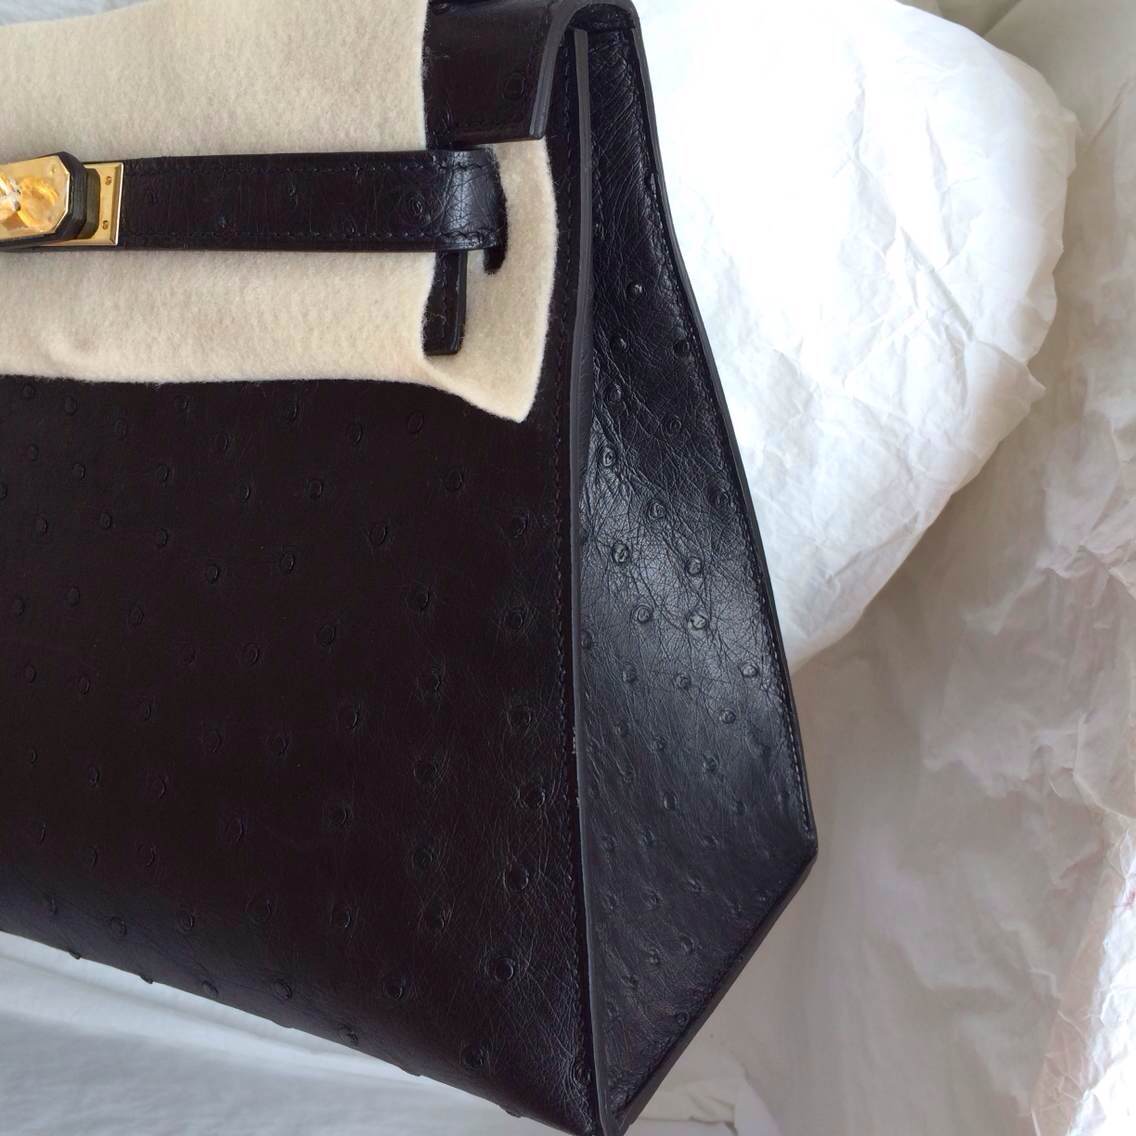 Hand Stitching Hermes Kelly Bag Sellier 89 Black Ostrich Leather Gold Hardware